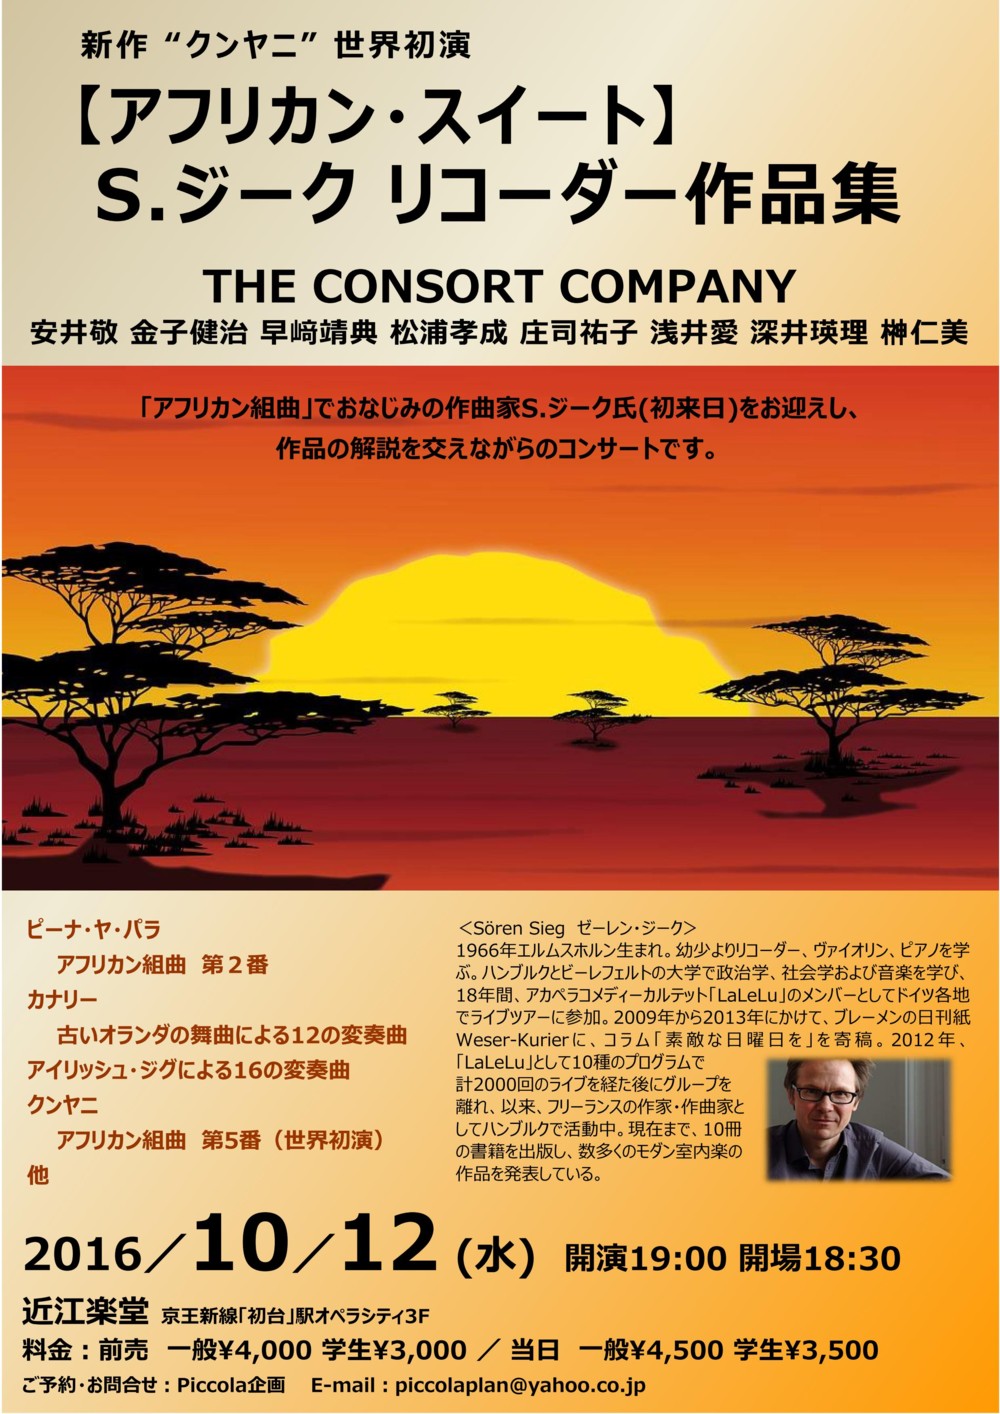 THE CONSORT COMPANY 新作“クンヤニ” 世界初演